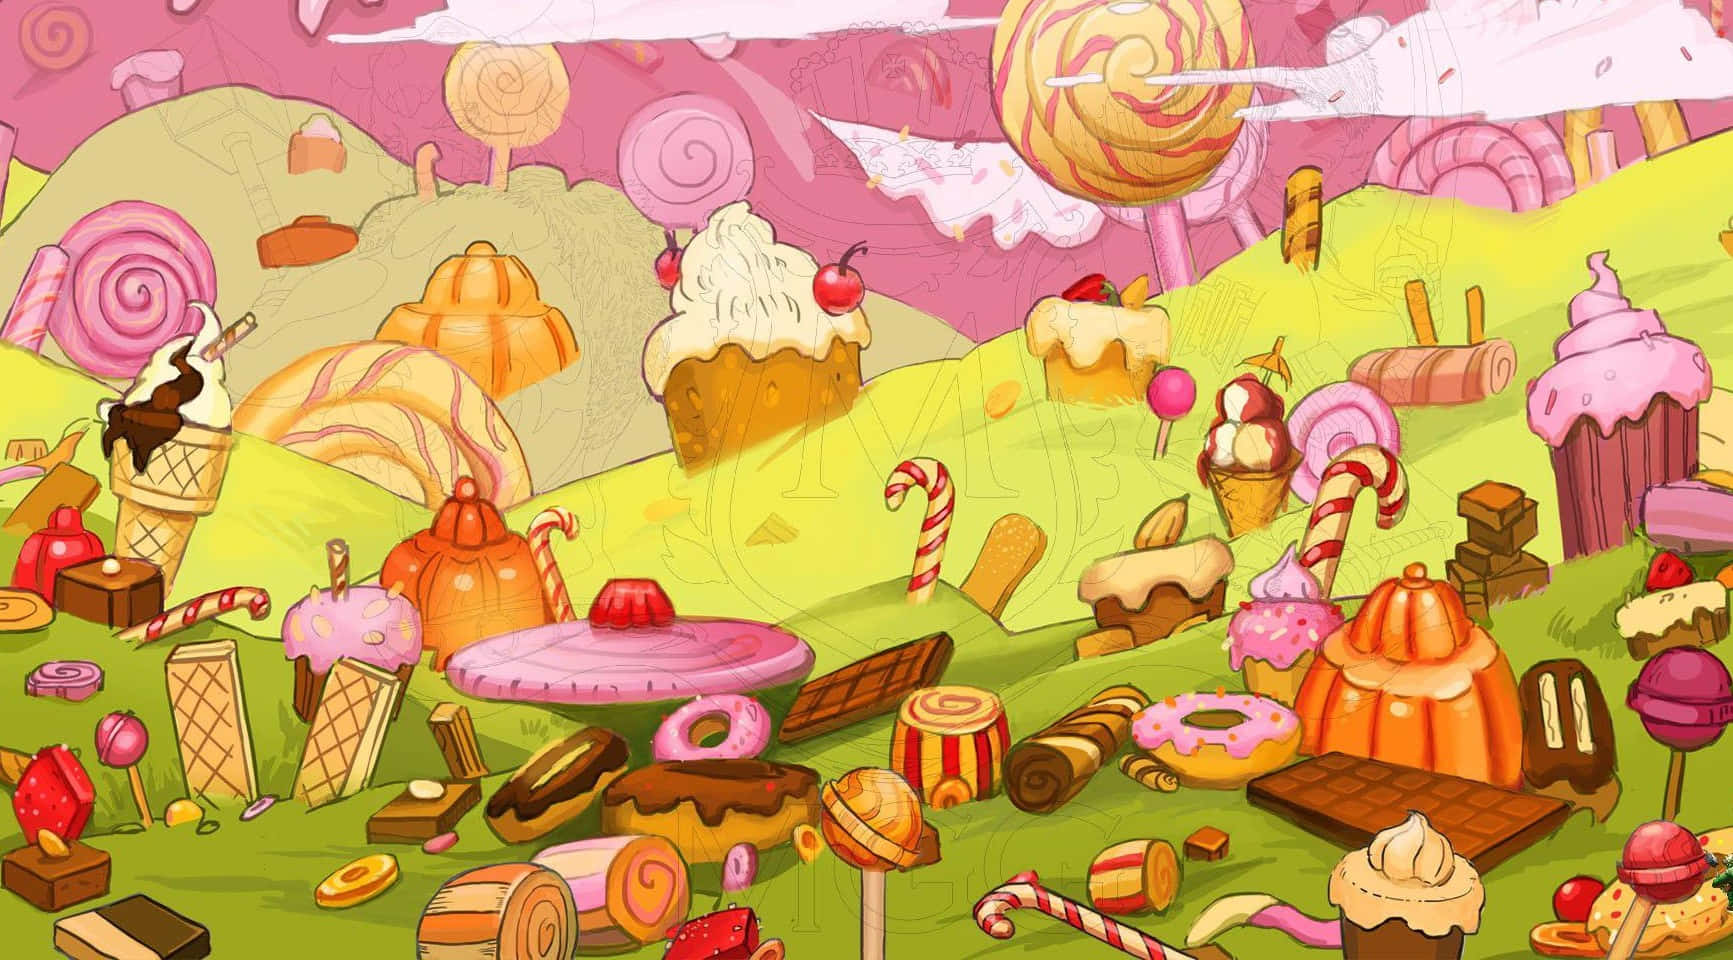 A Cartoon Scene With Many Candy And Candies